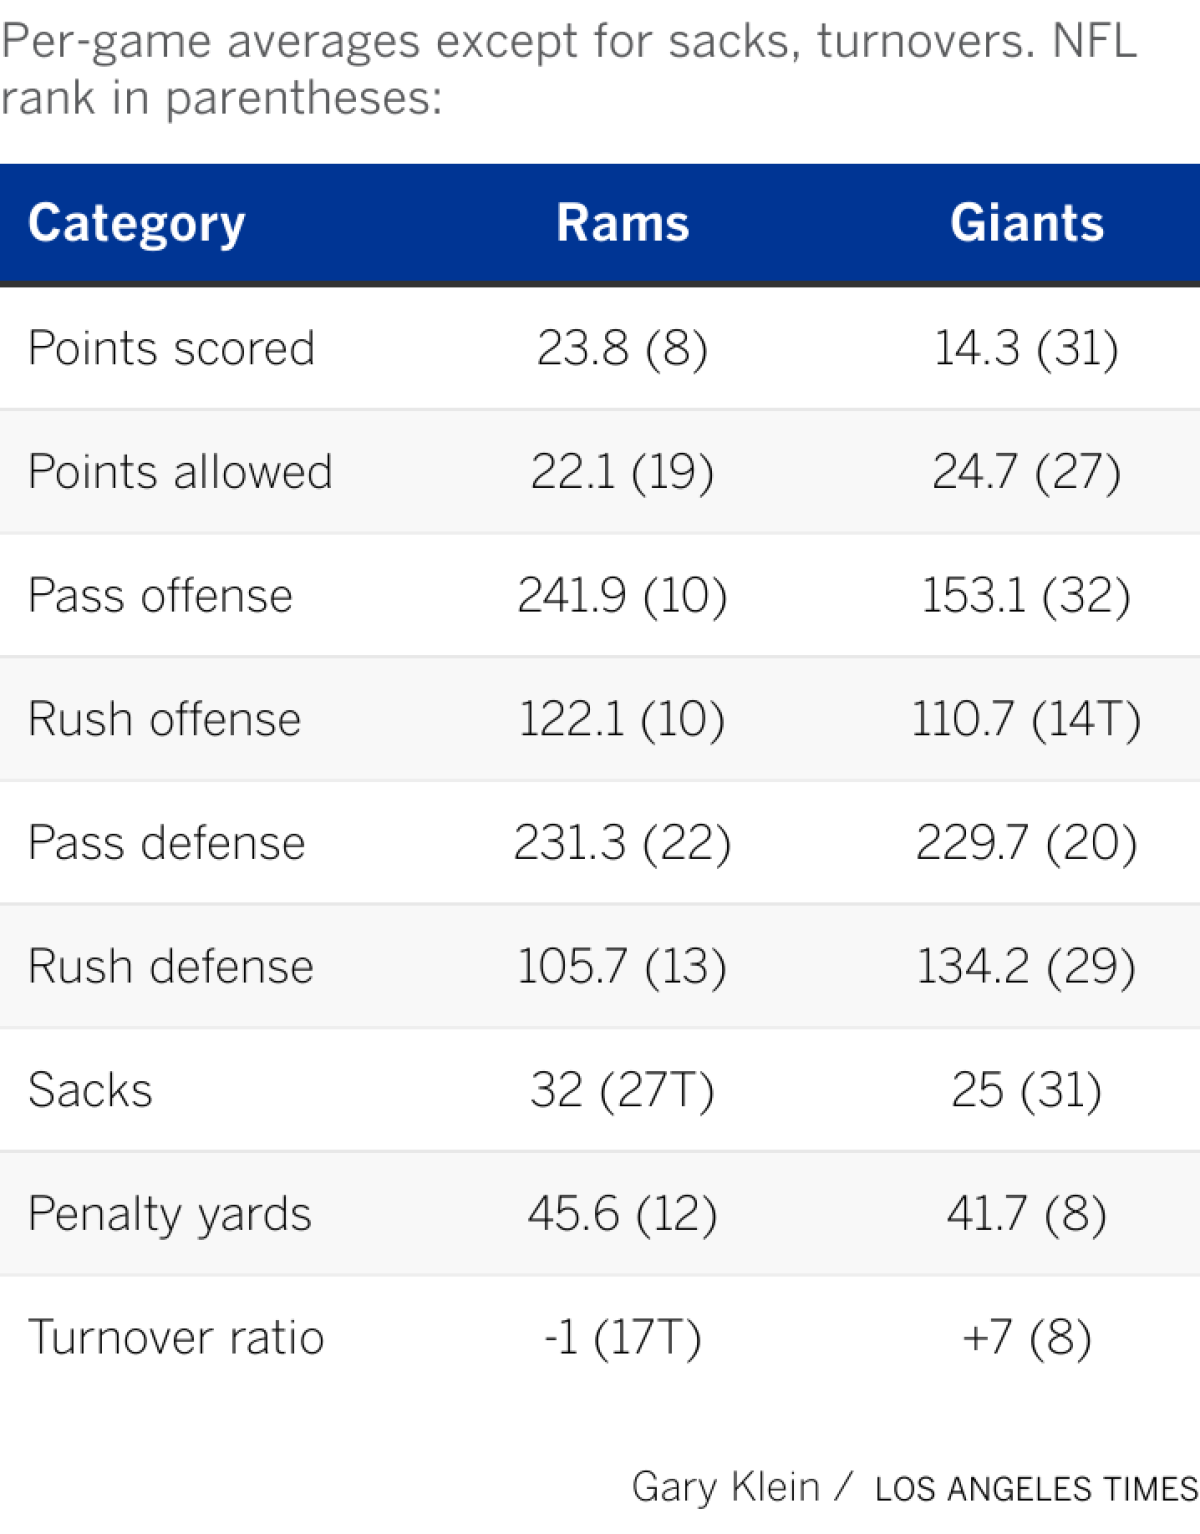 Breaking down the top team statistics for both the Rams and the Giants.